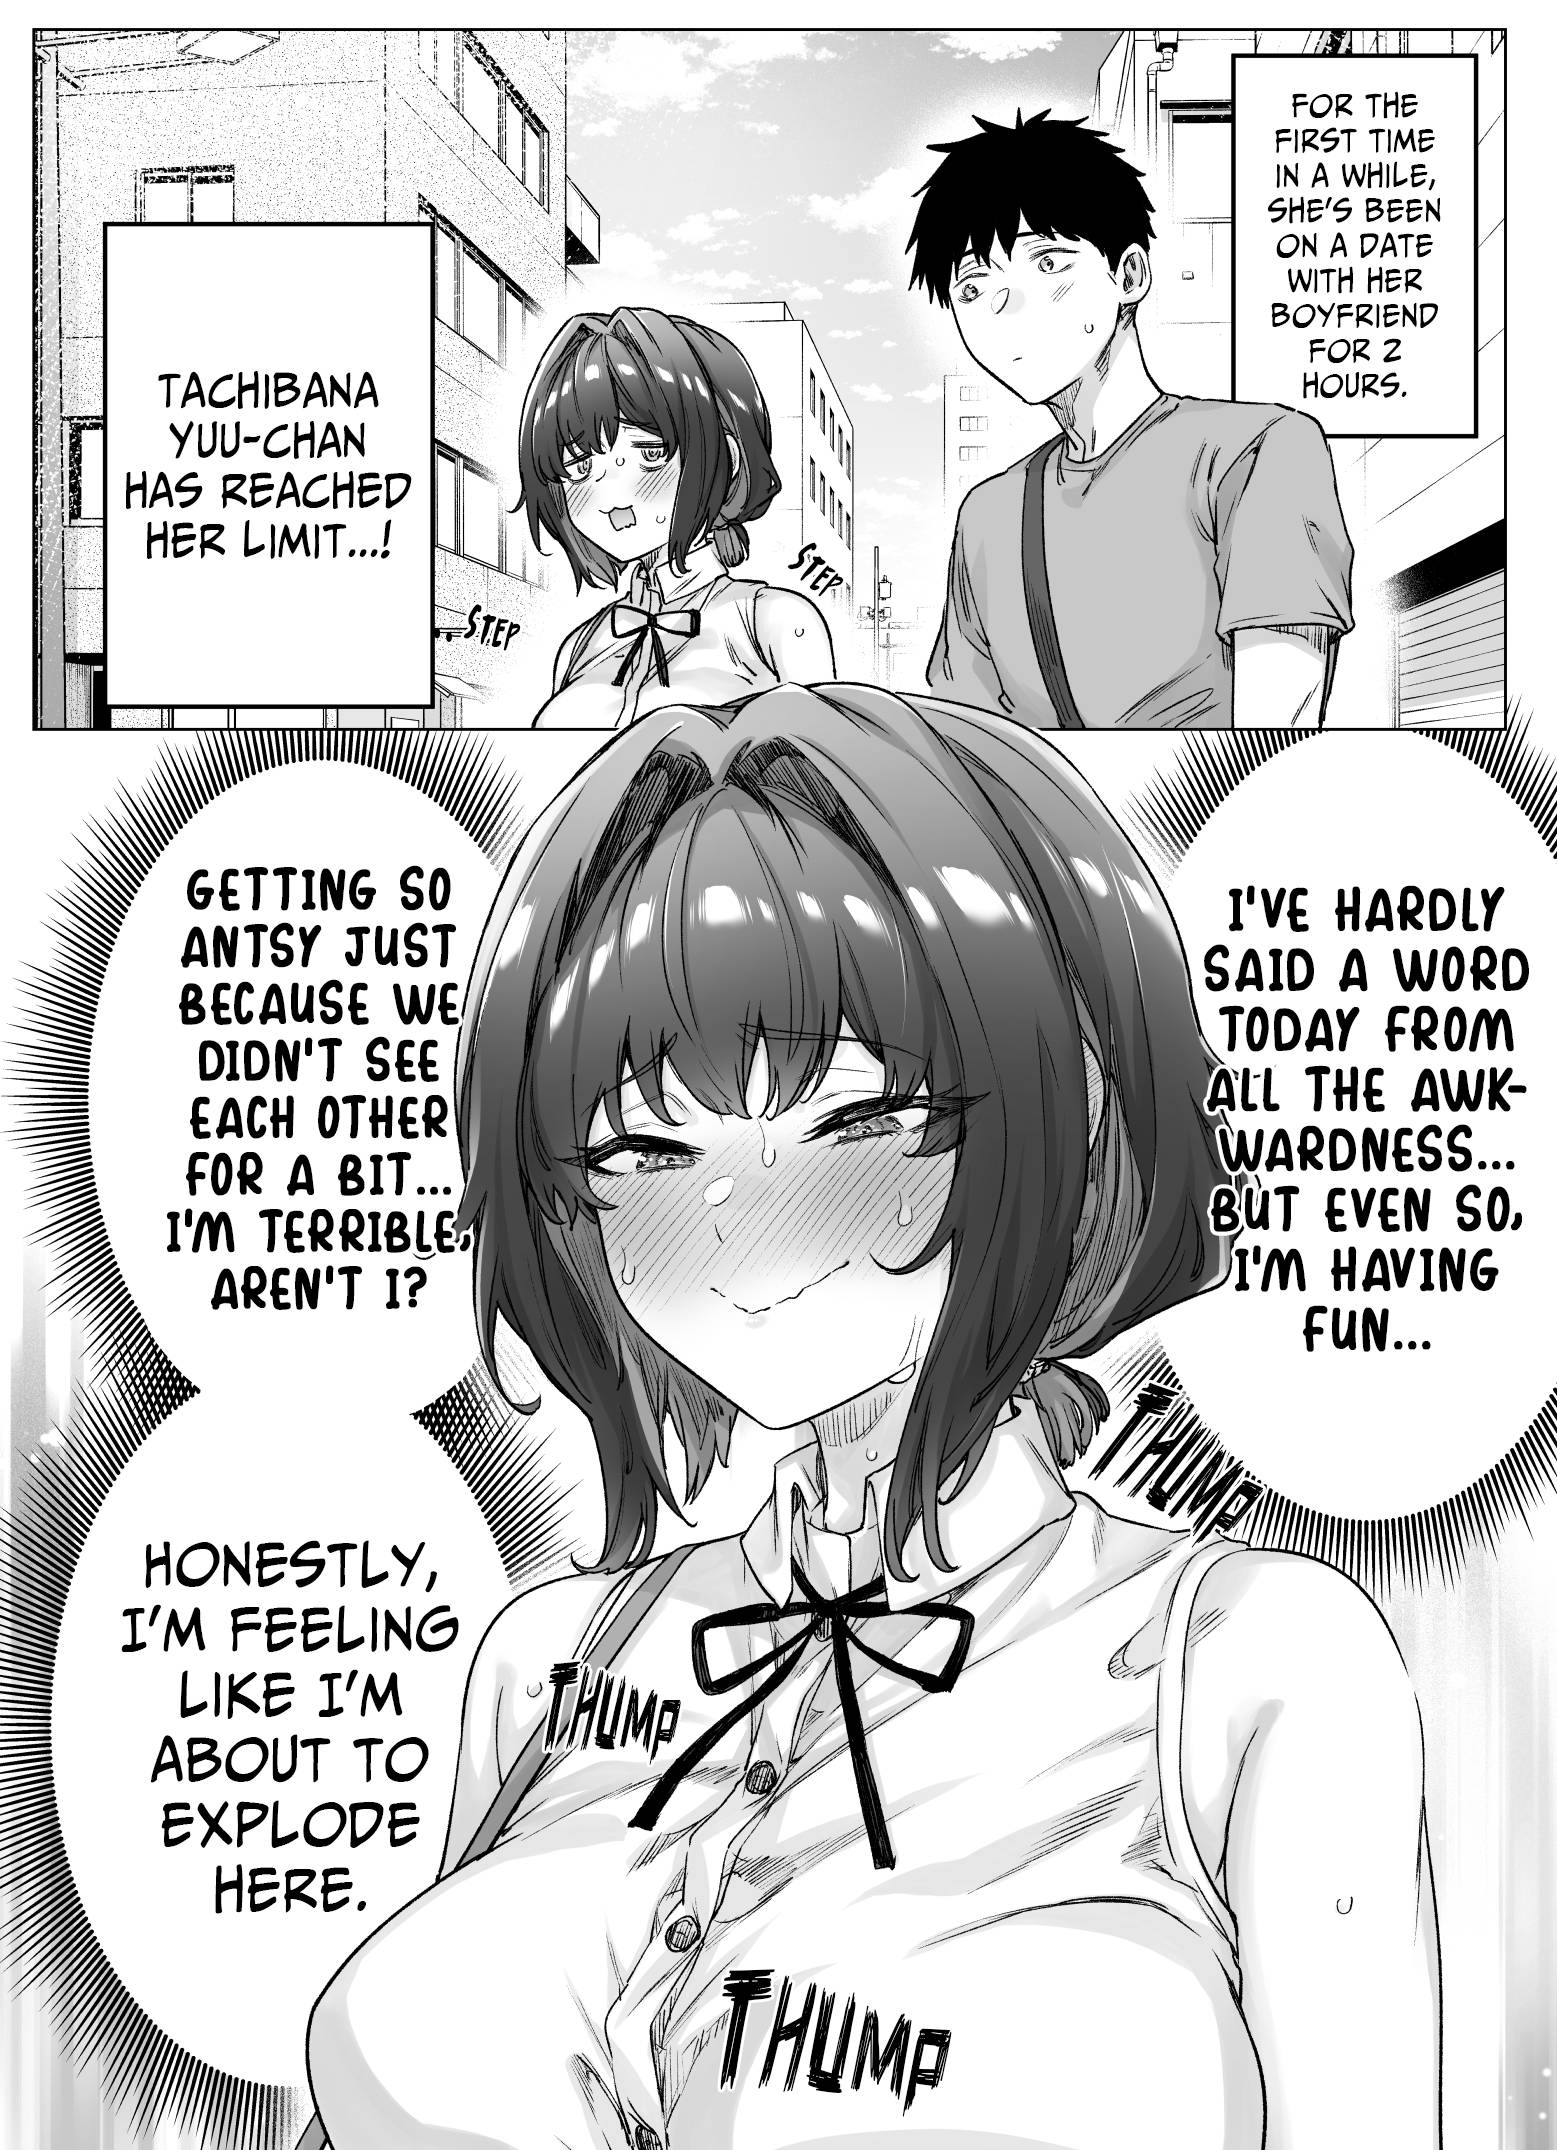 The Tsuntsuntsuntsuntsuntsuntsuntsuntsuntsuntsundere Girl Getting Less and Less Tsun Day by Day - chapter 85 - #1